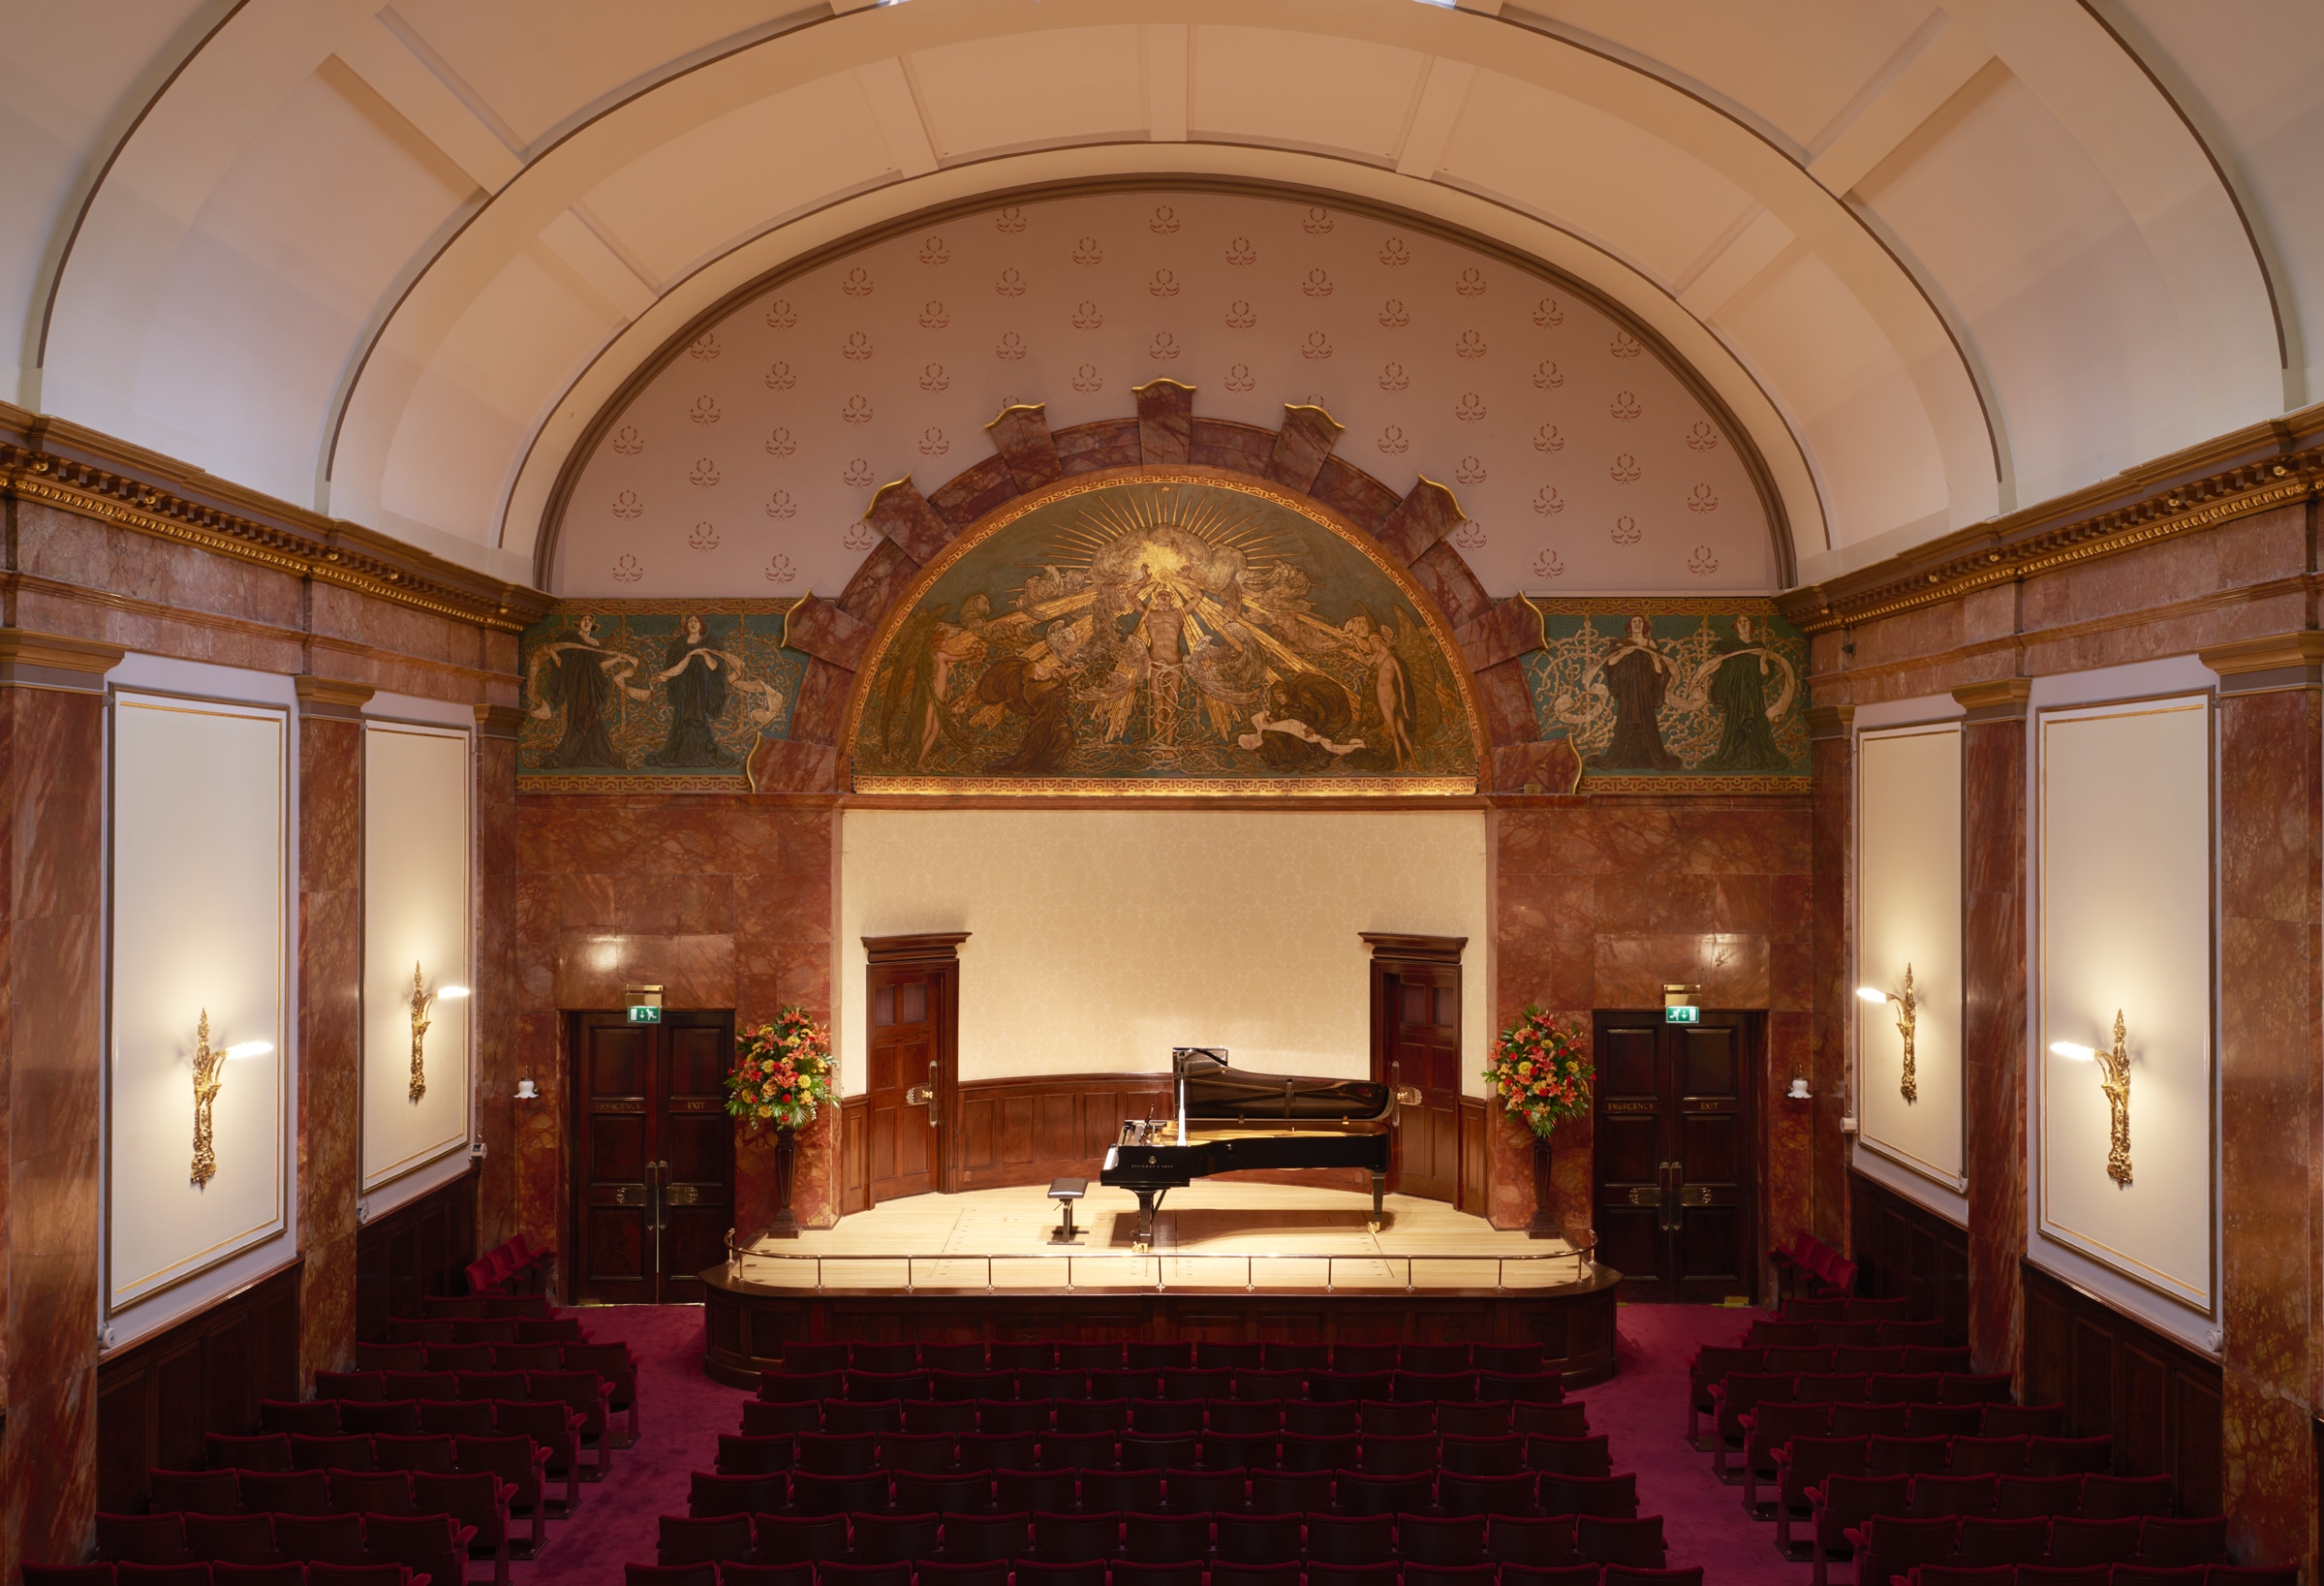 Look forward to Summer concerts at Wigmore Hall